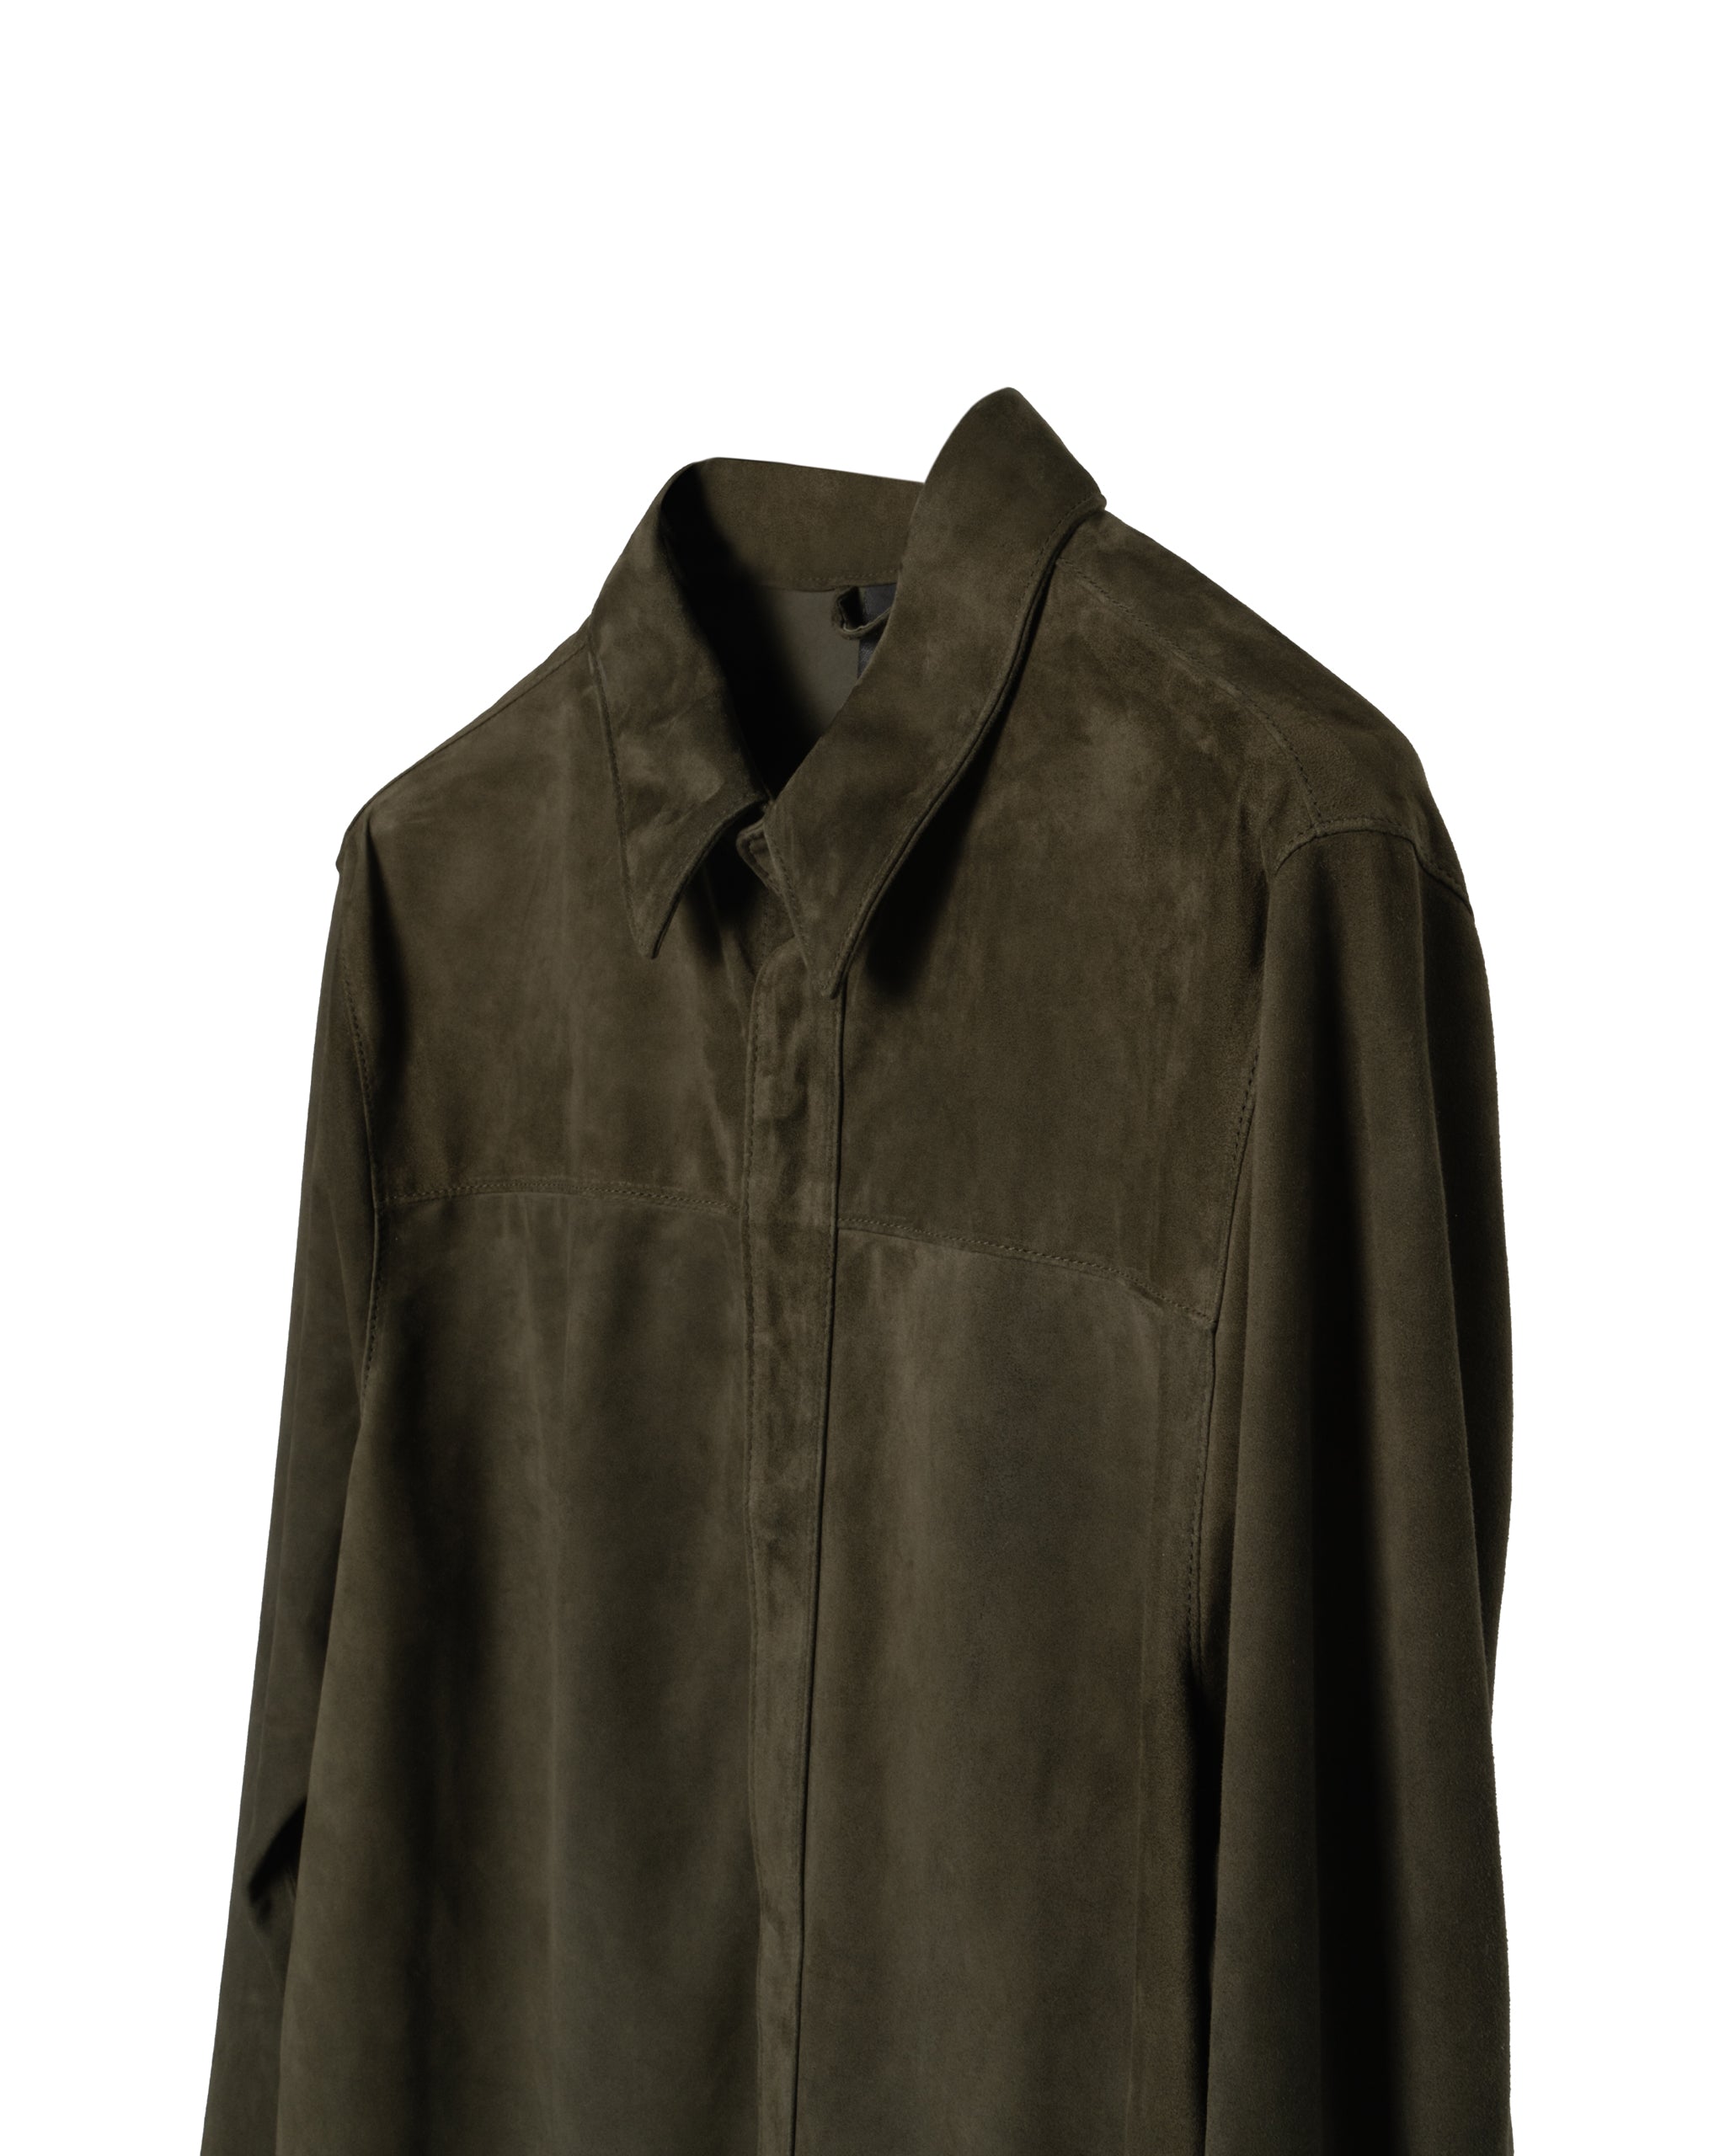 SUEDE LEATHER SHIRT